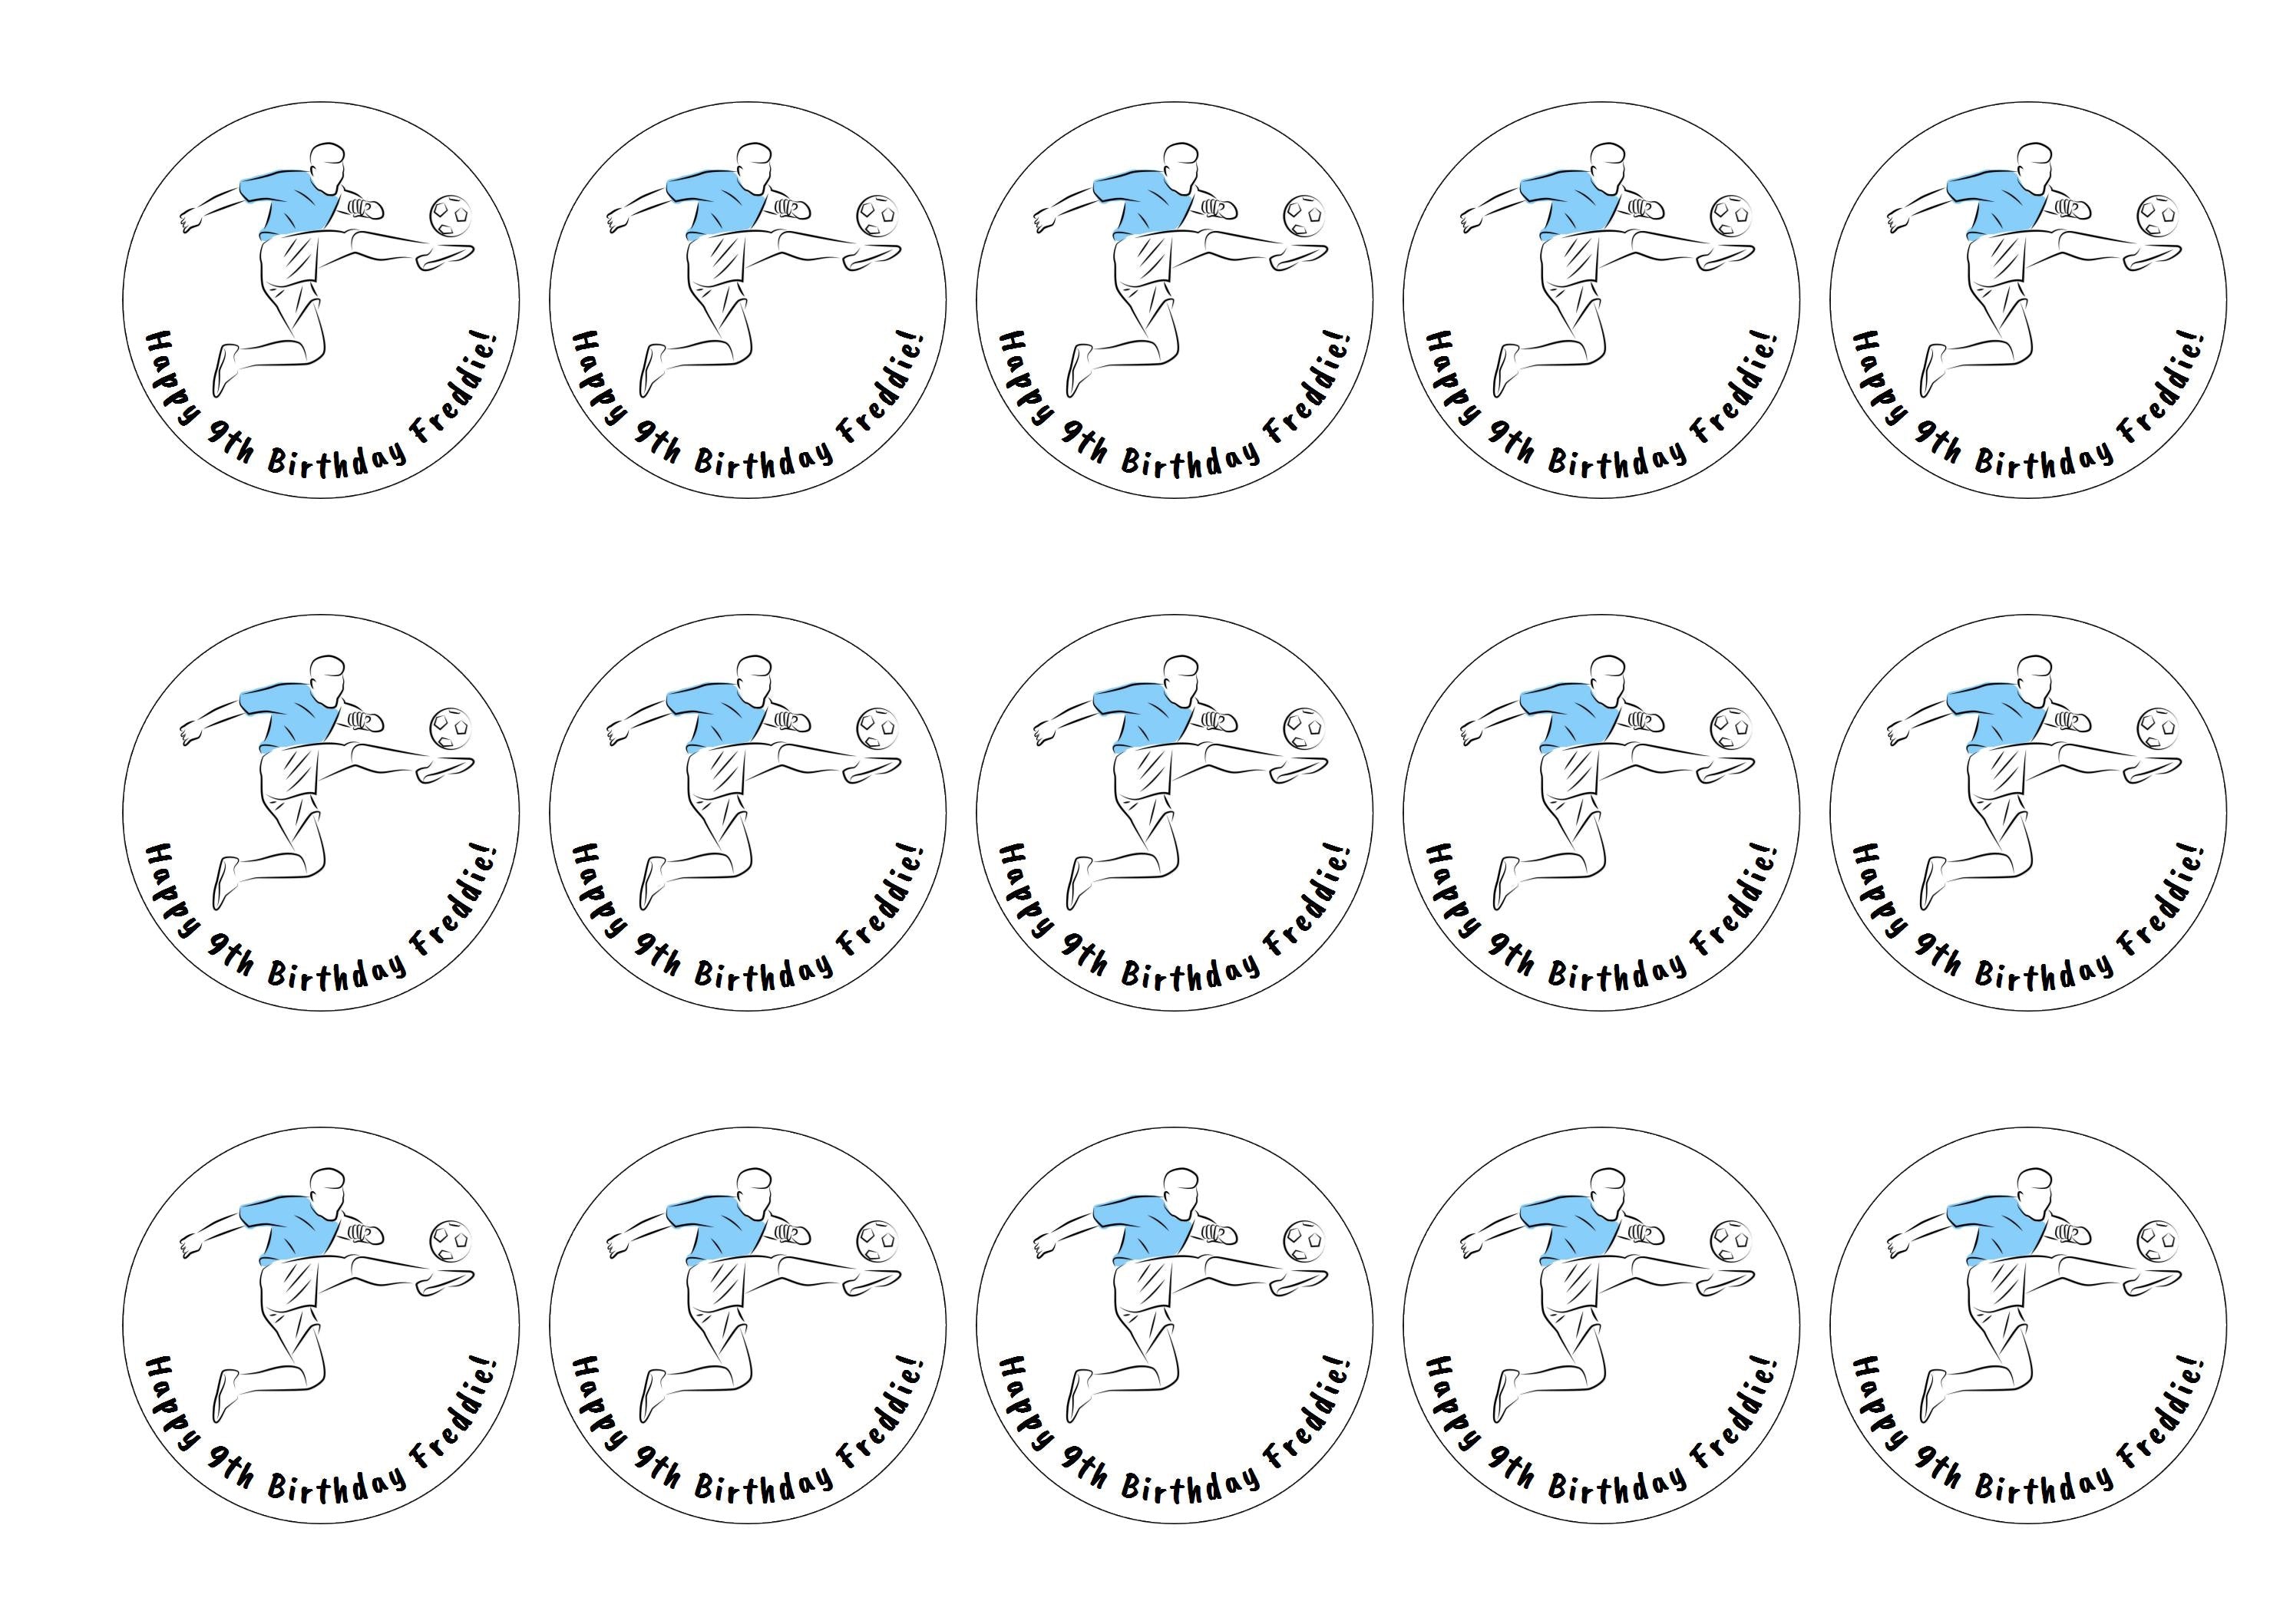 15 edible cupcake toppers with a light blue football design with personalised message